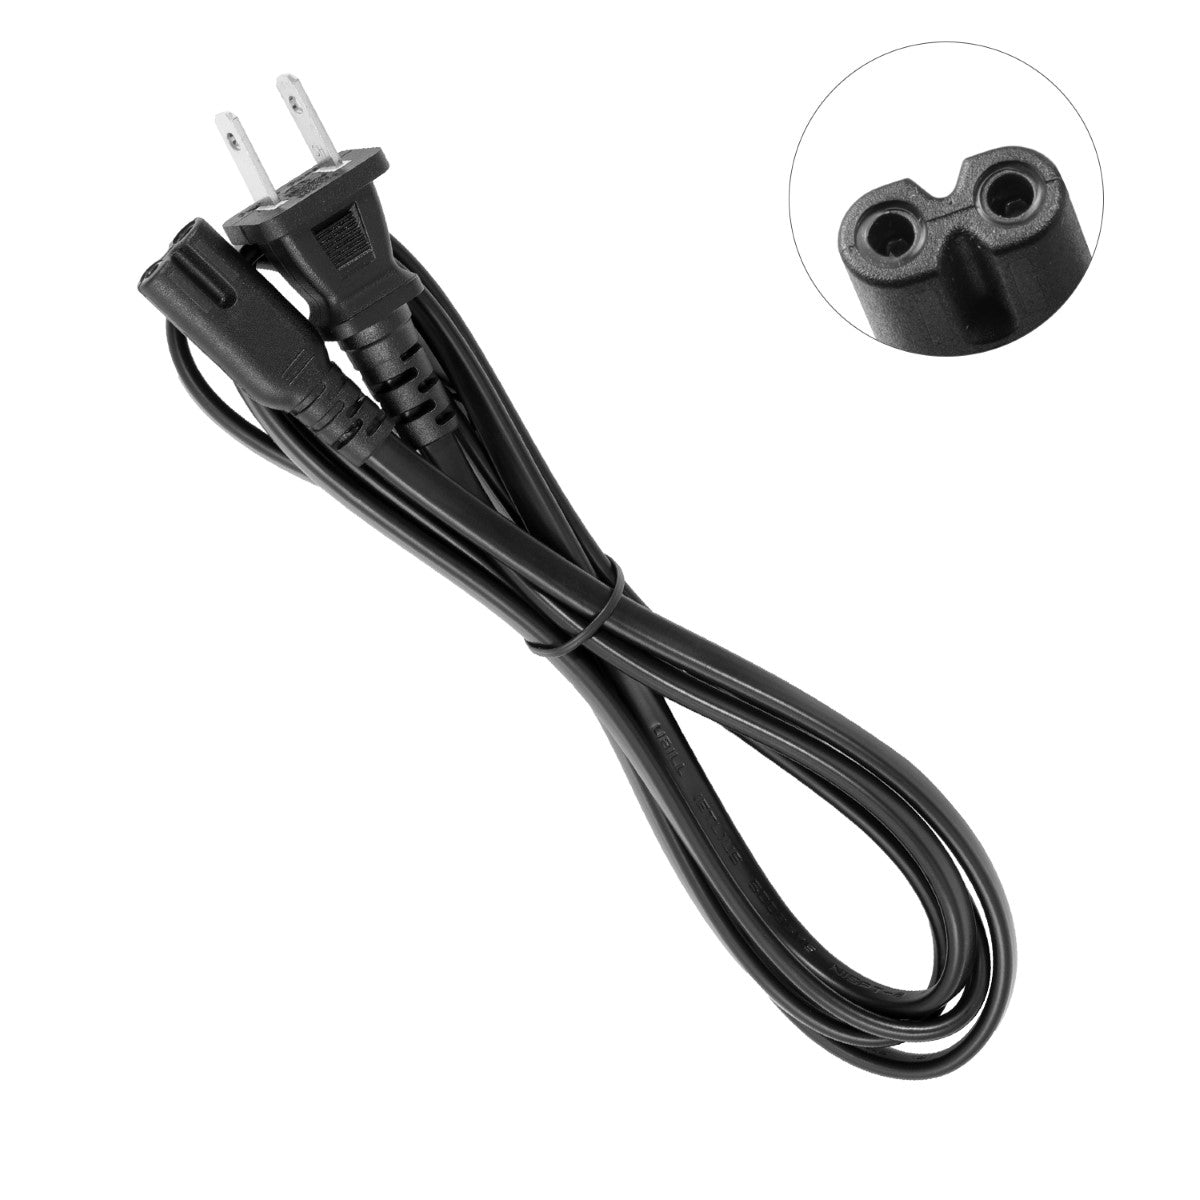 Power Cable for HP OfficeJet 200 Mobile Printer.